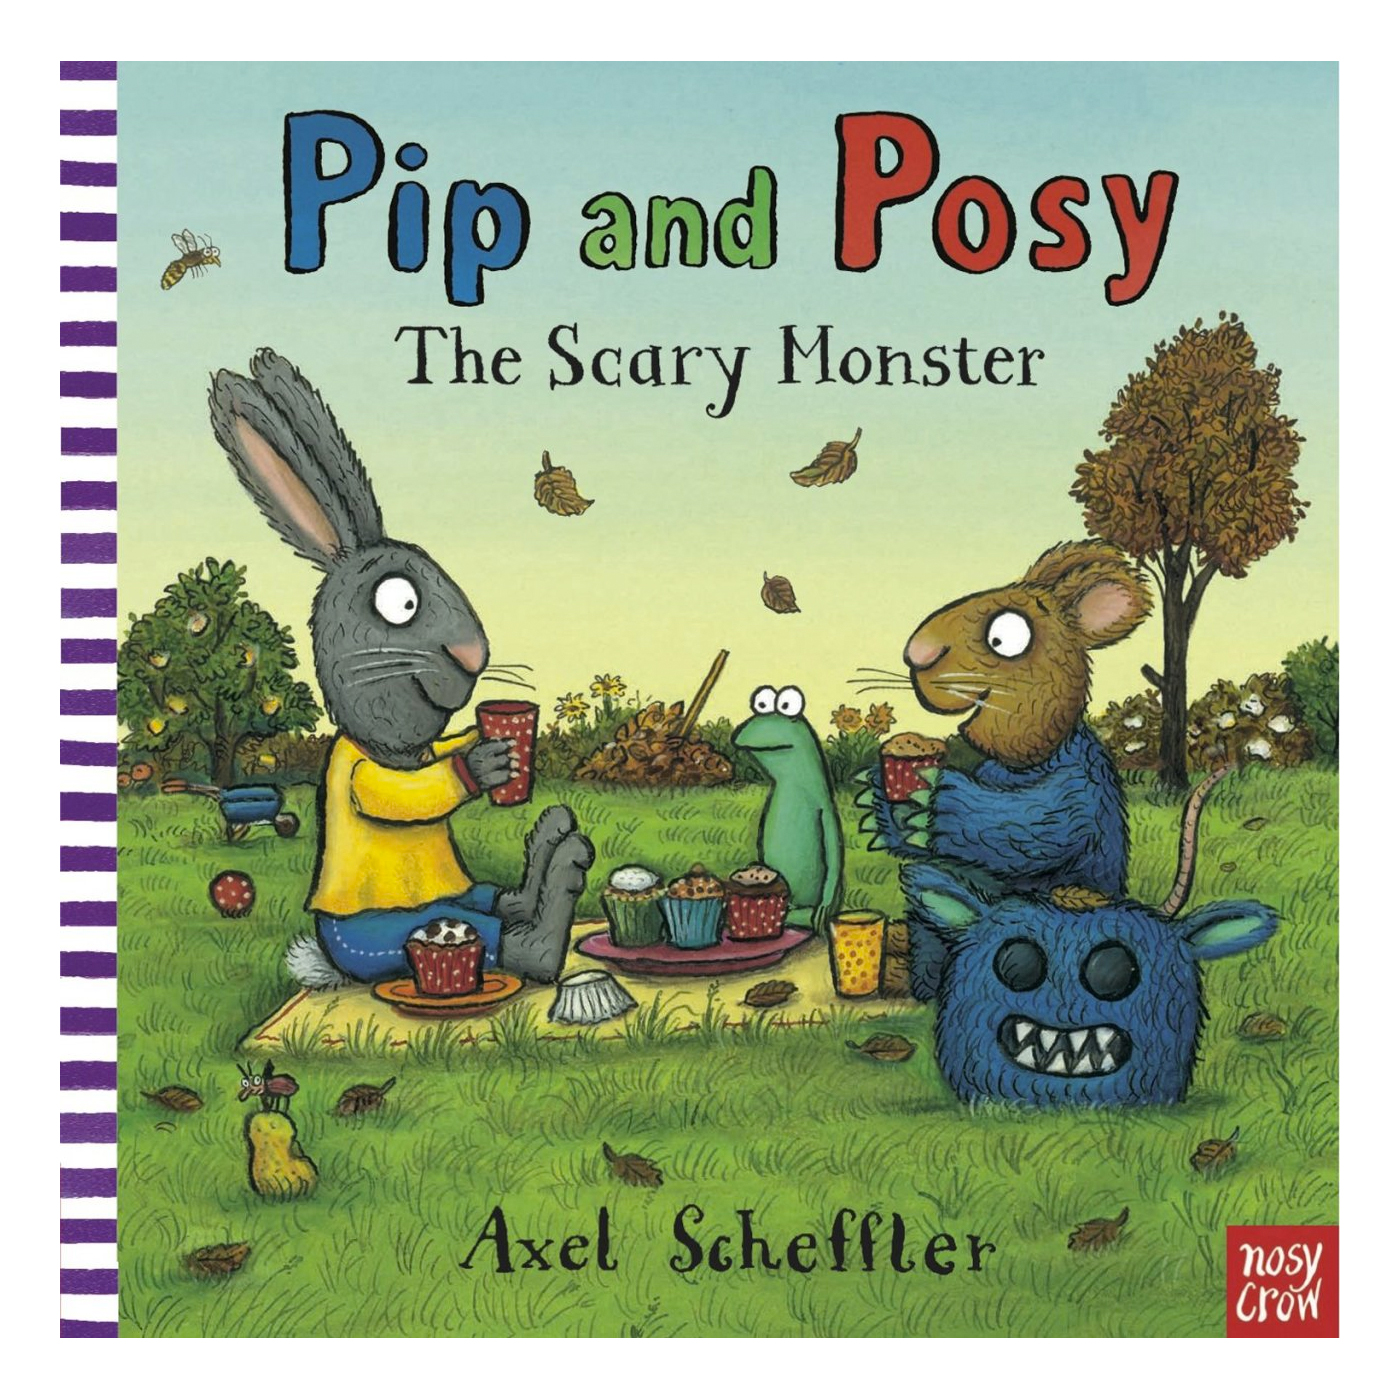  Pip and Posy: The Scary Monster